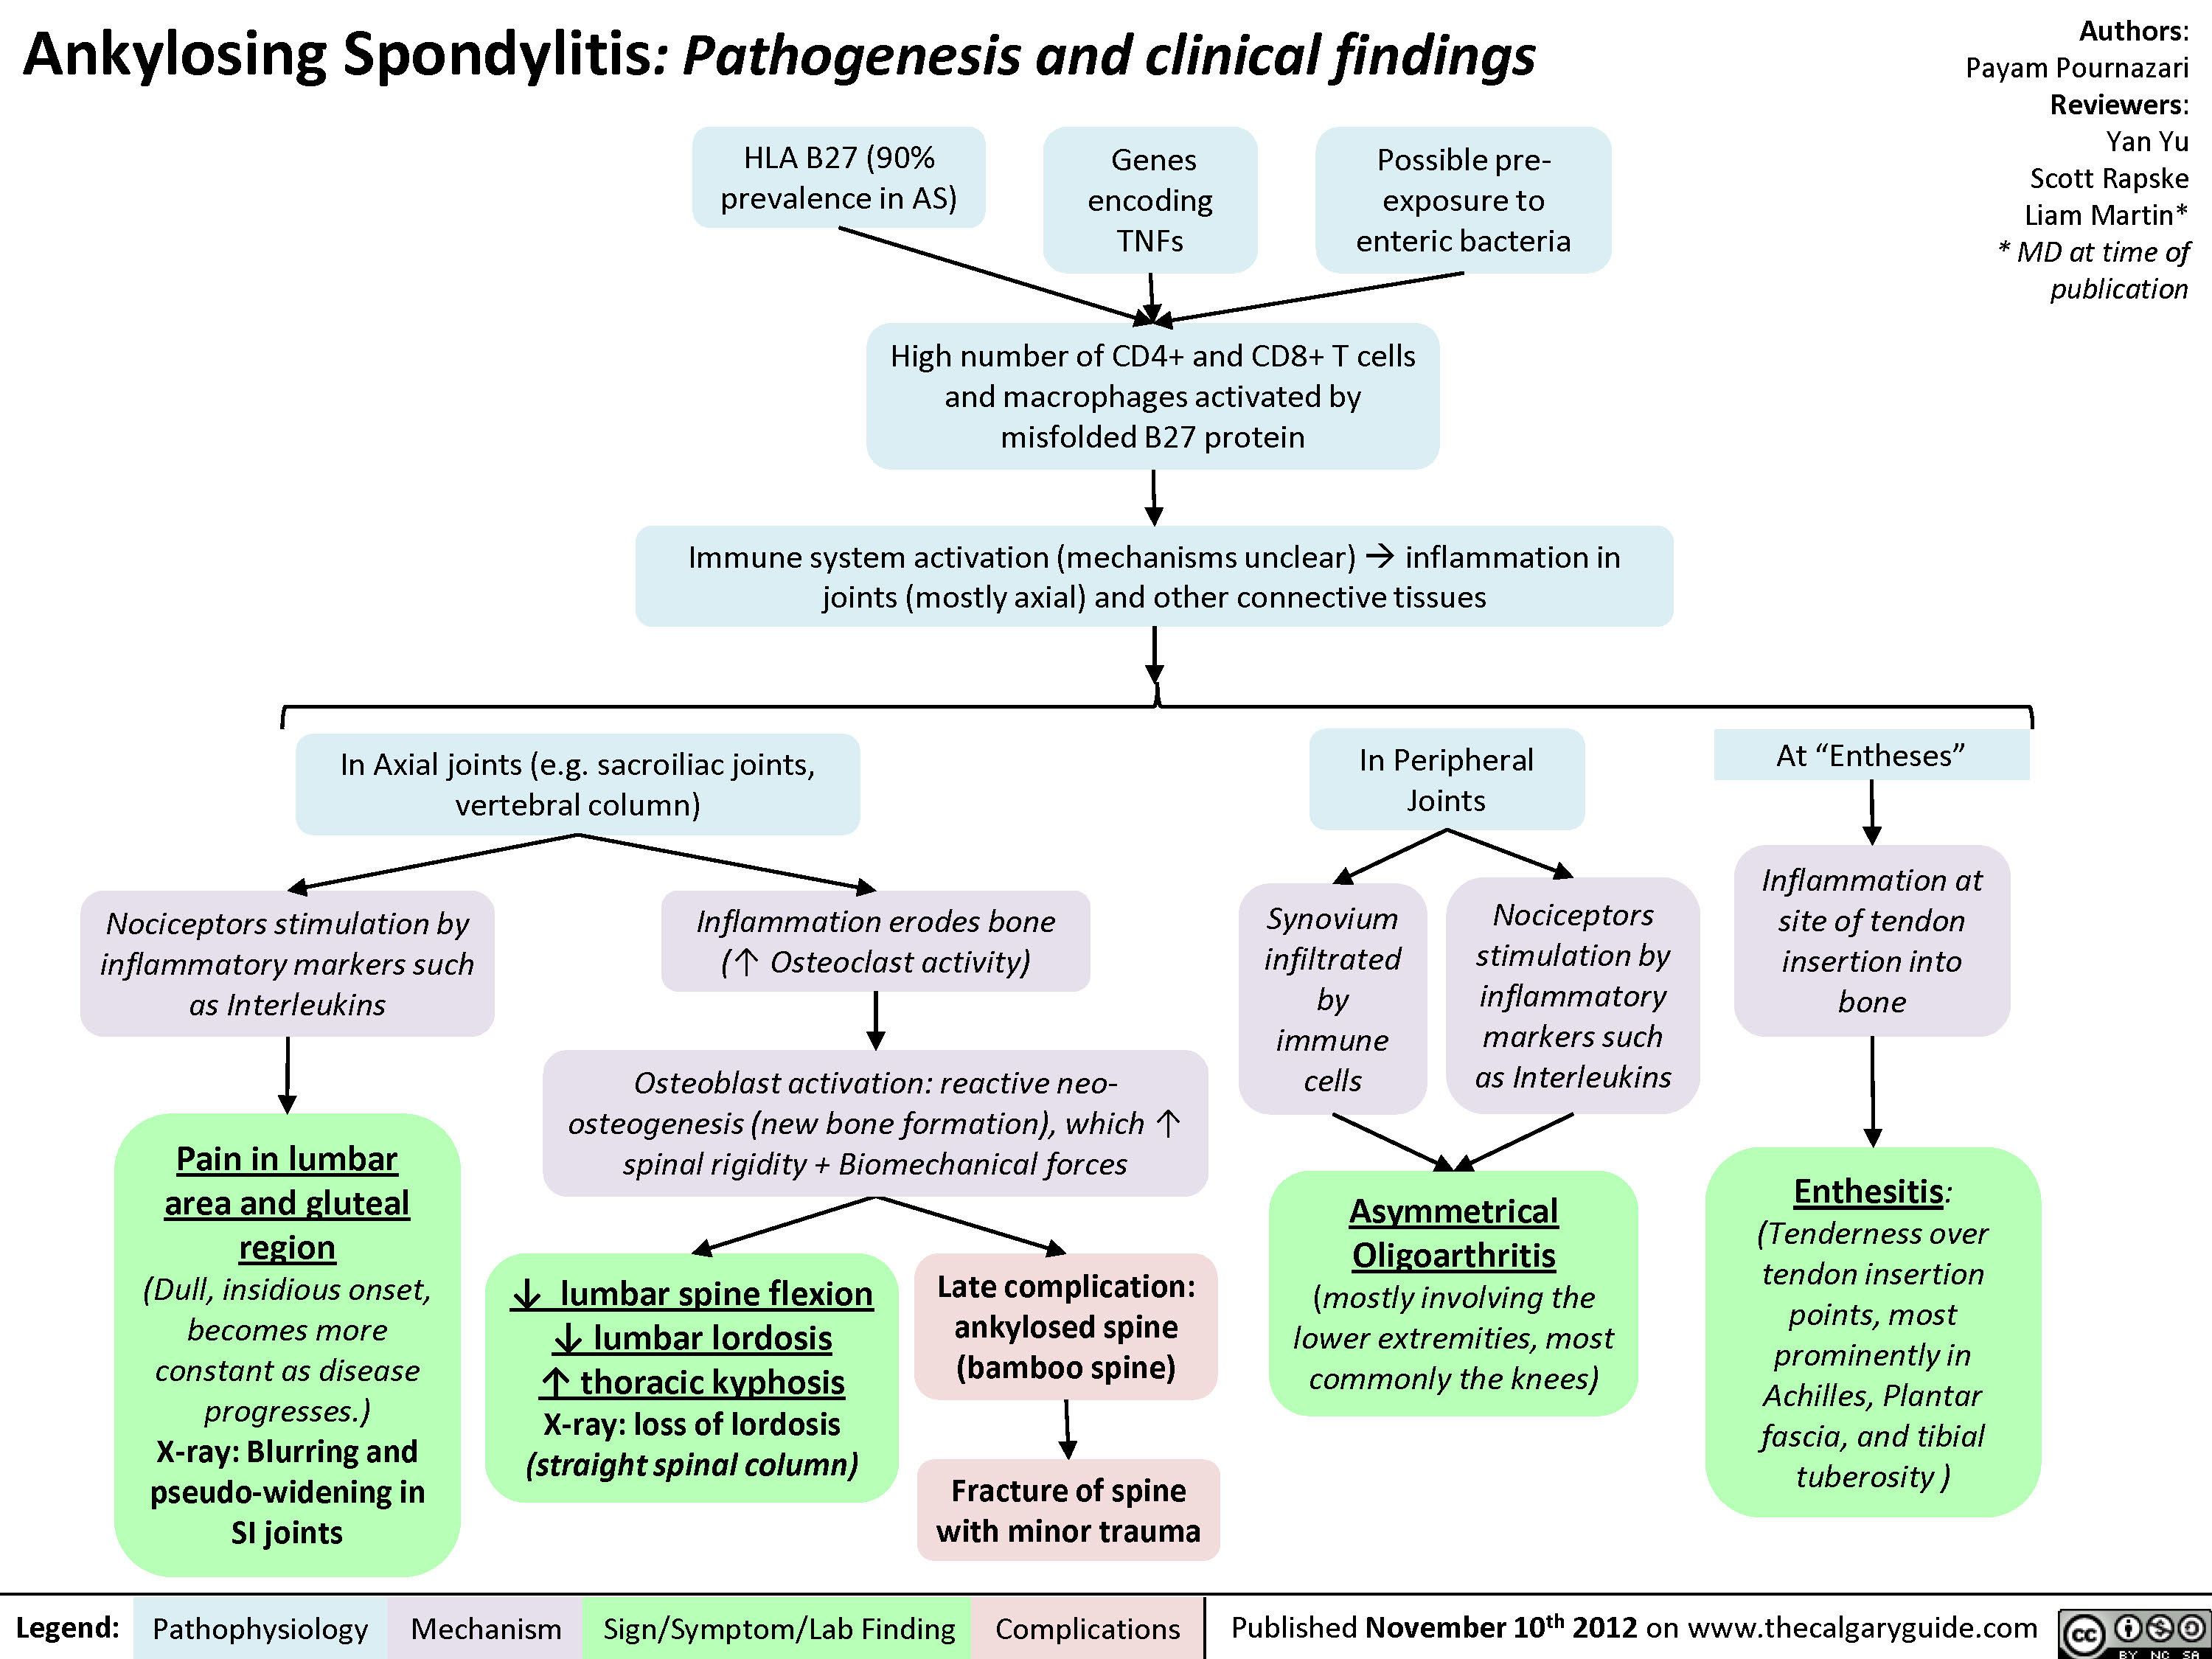 Ankylosing Spondylitis: Pathogenesis and Clinical findings